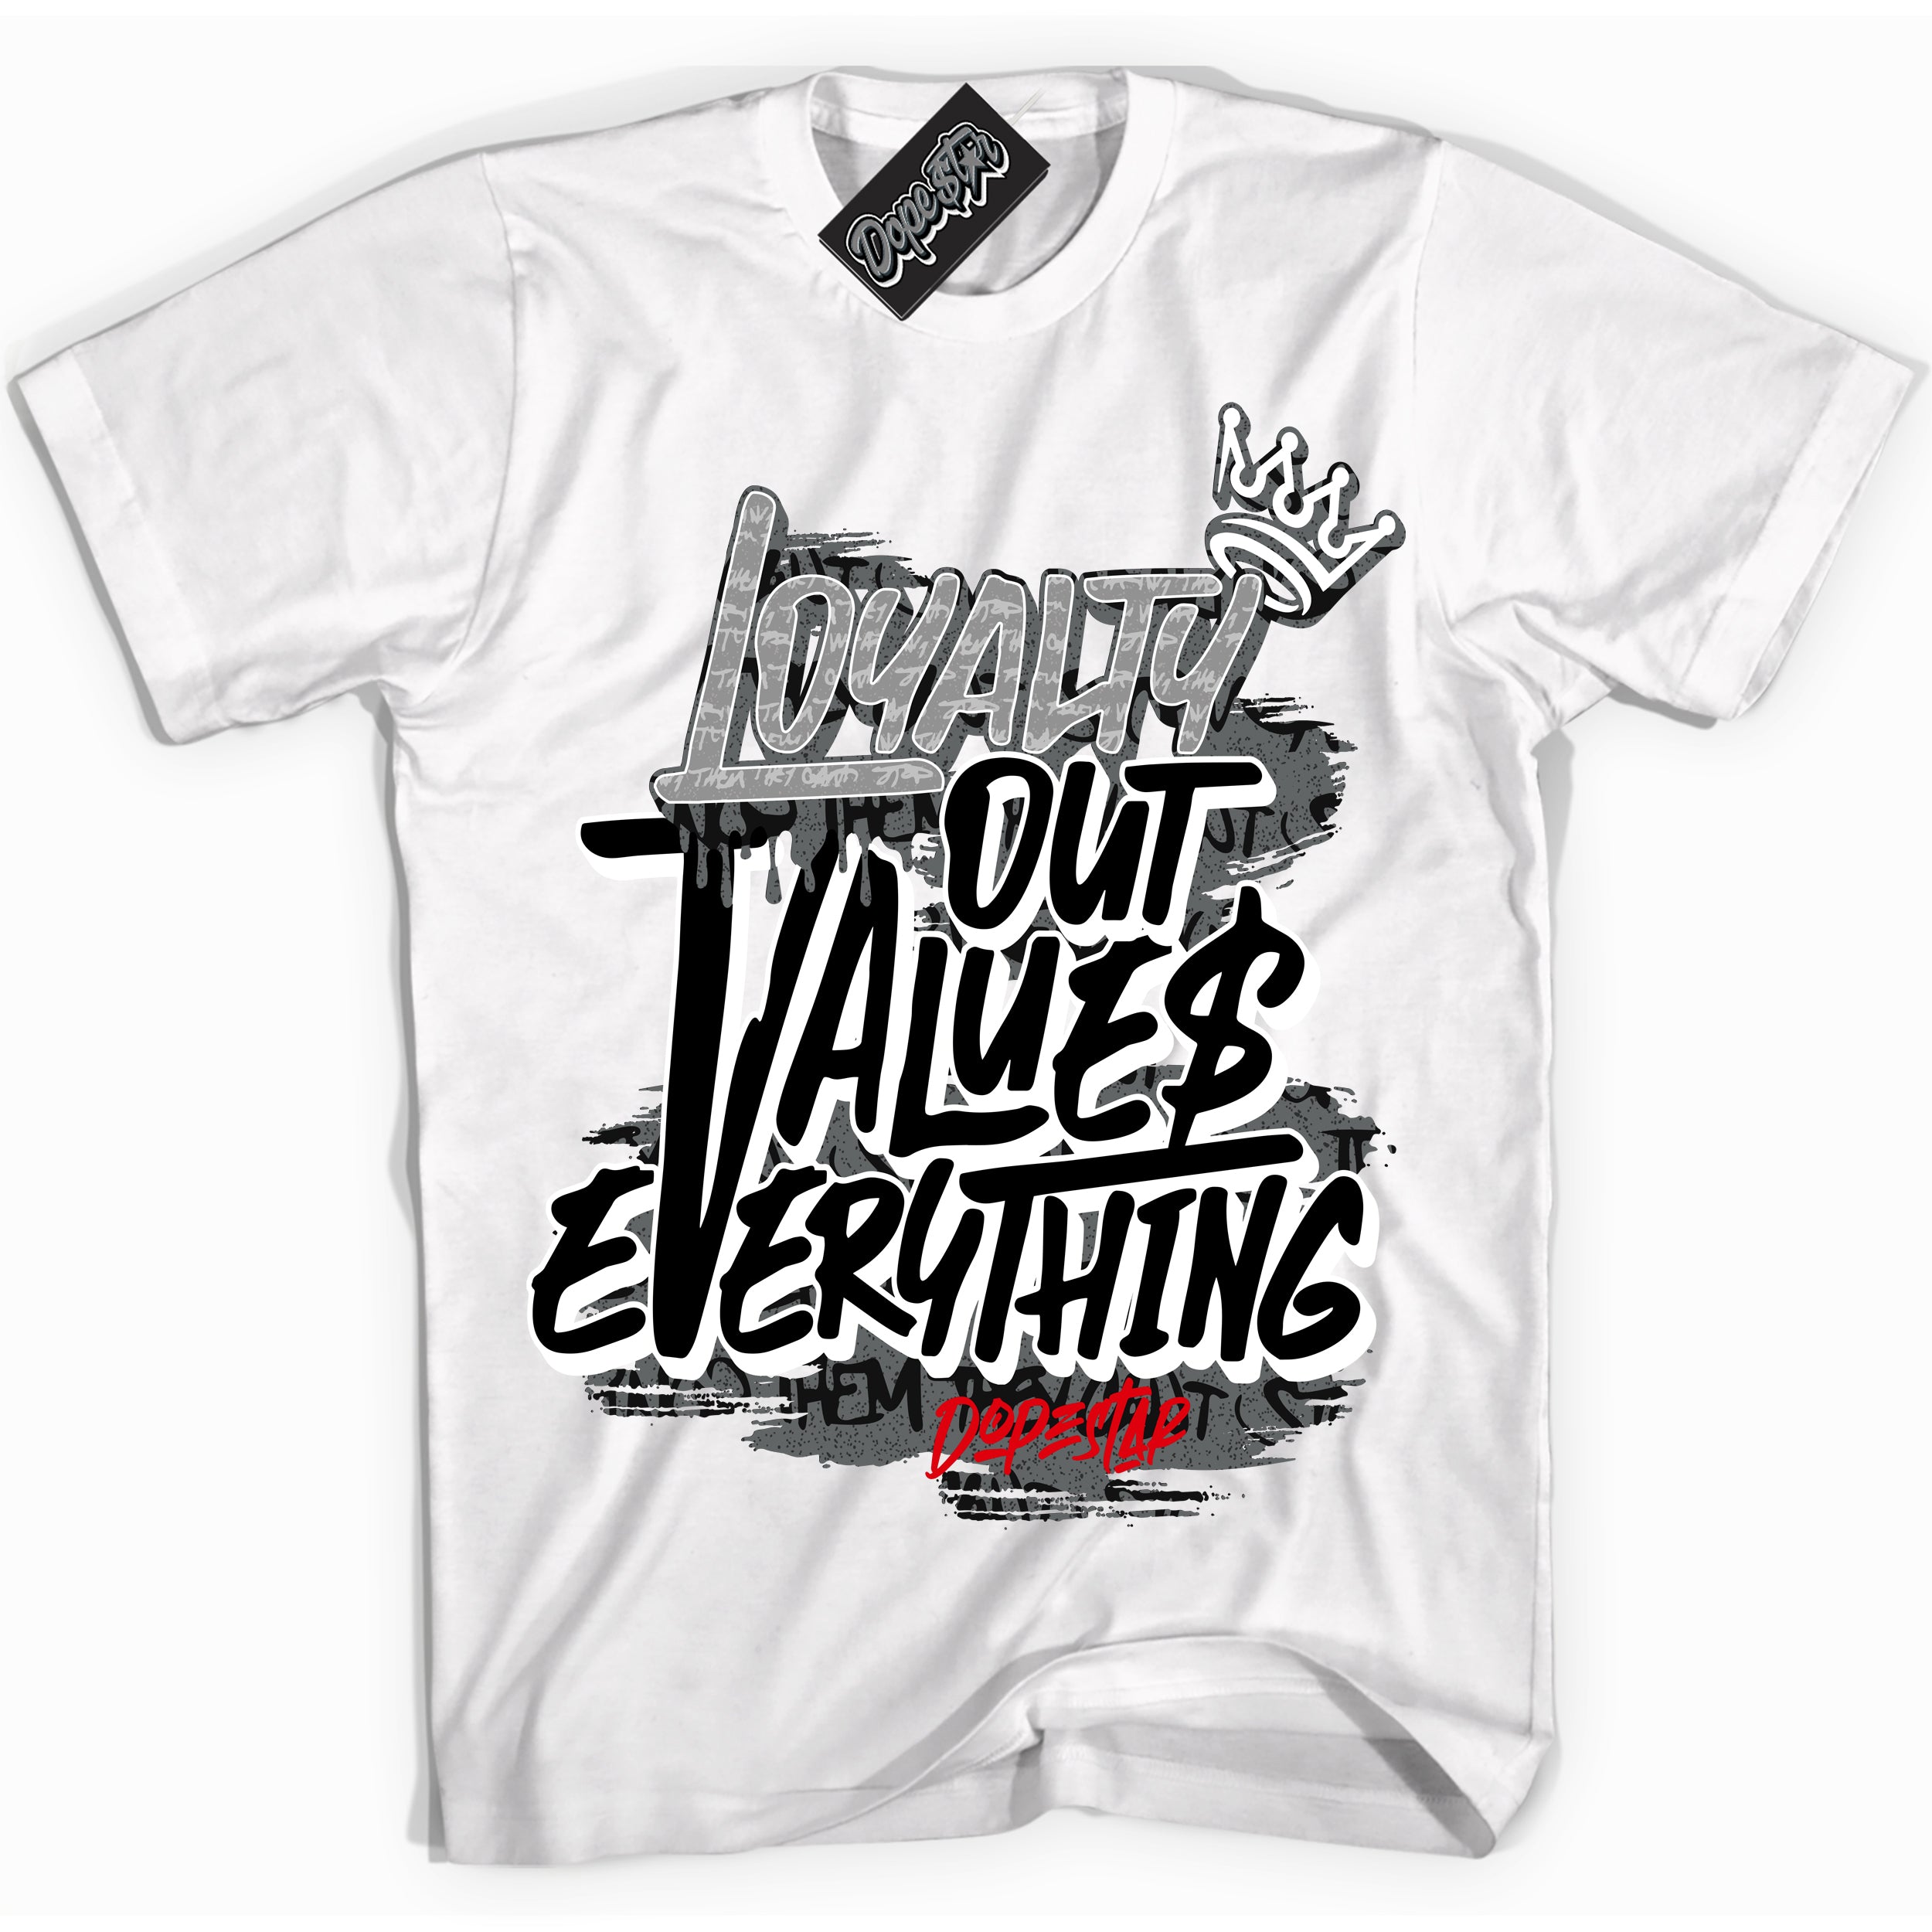 Cool White Shirt with “ Loyalty Out Values Everything” design that perfectly matches Rebellionaire 1s Sneakers.